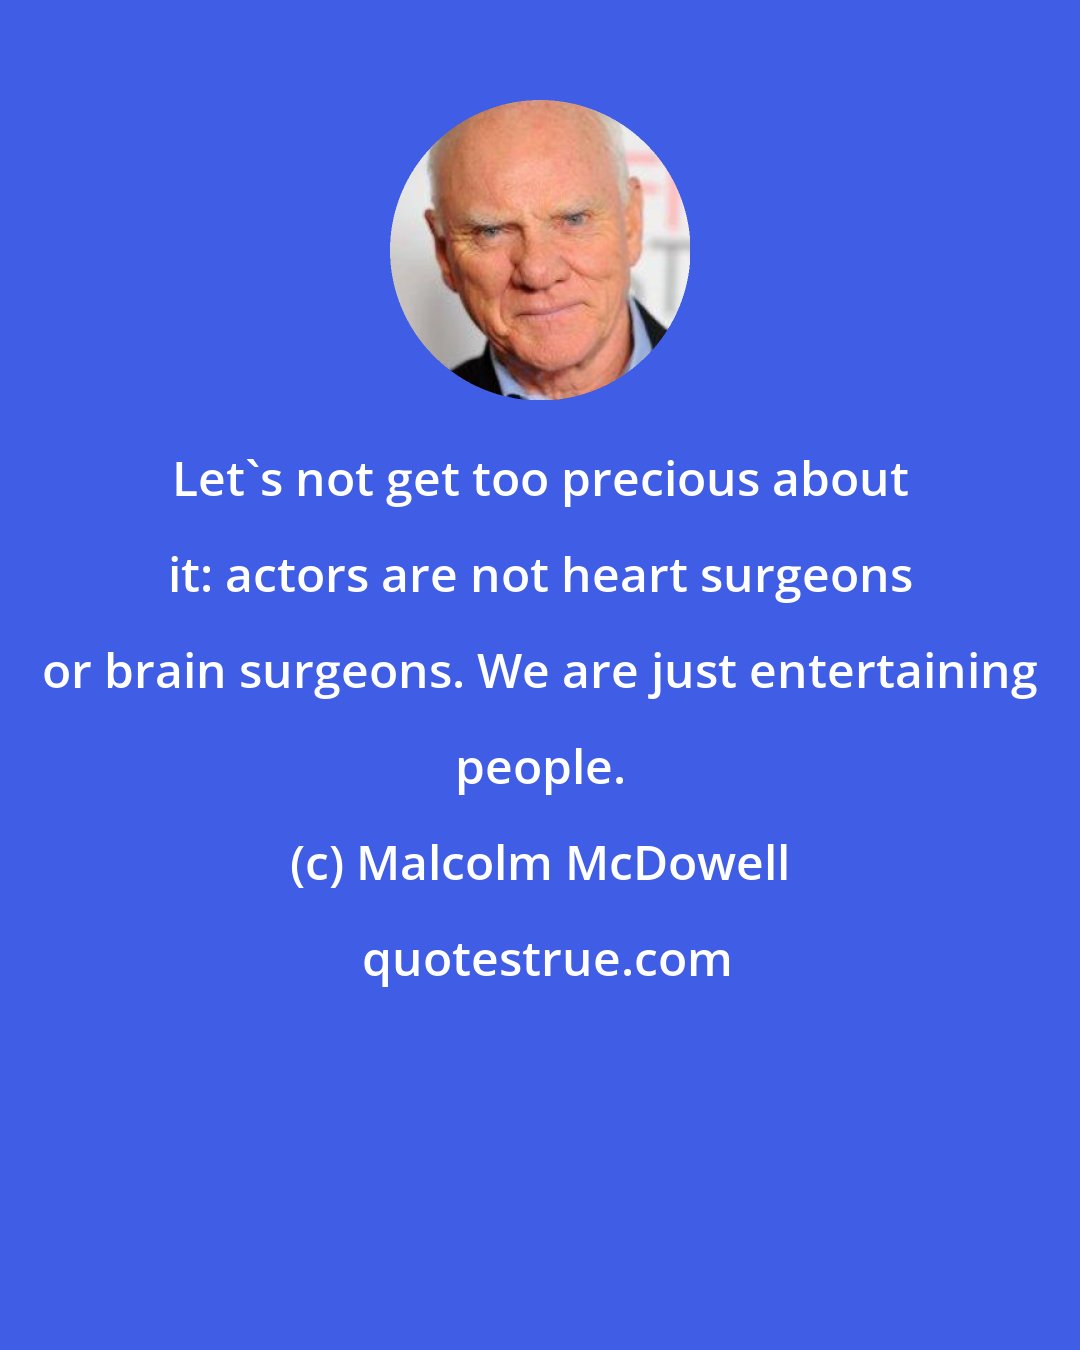 Malcolm McDowell: Let's not get too precious about it: actors are not heart surgeons or brain surgeons. We are just entertaining people.